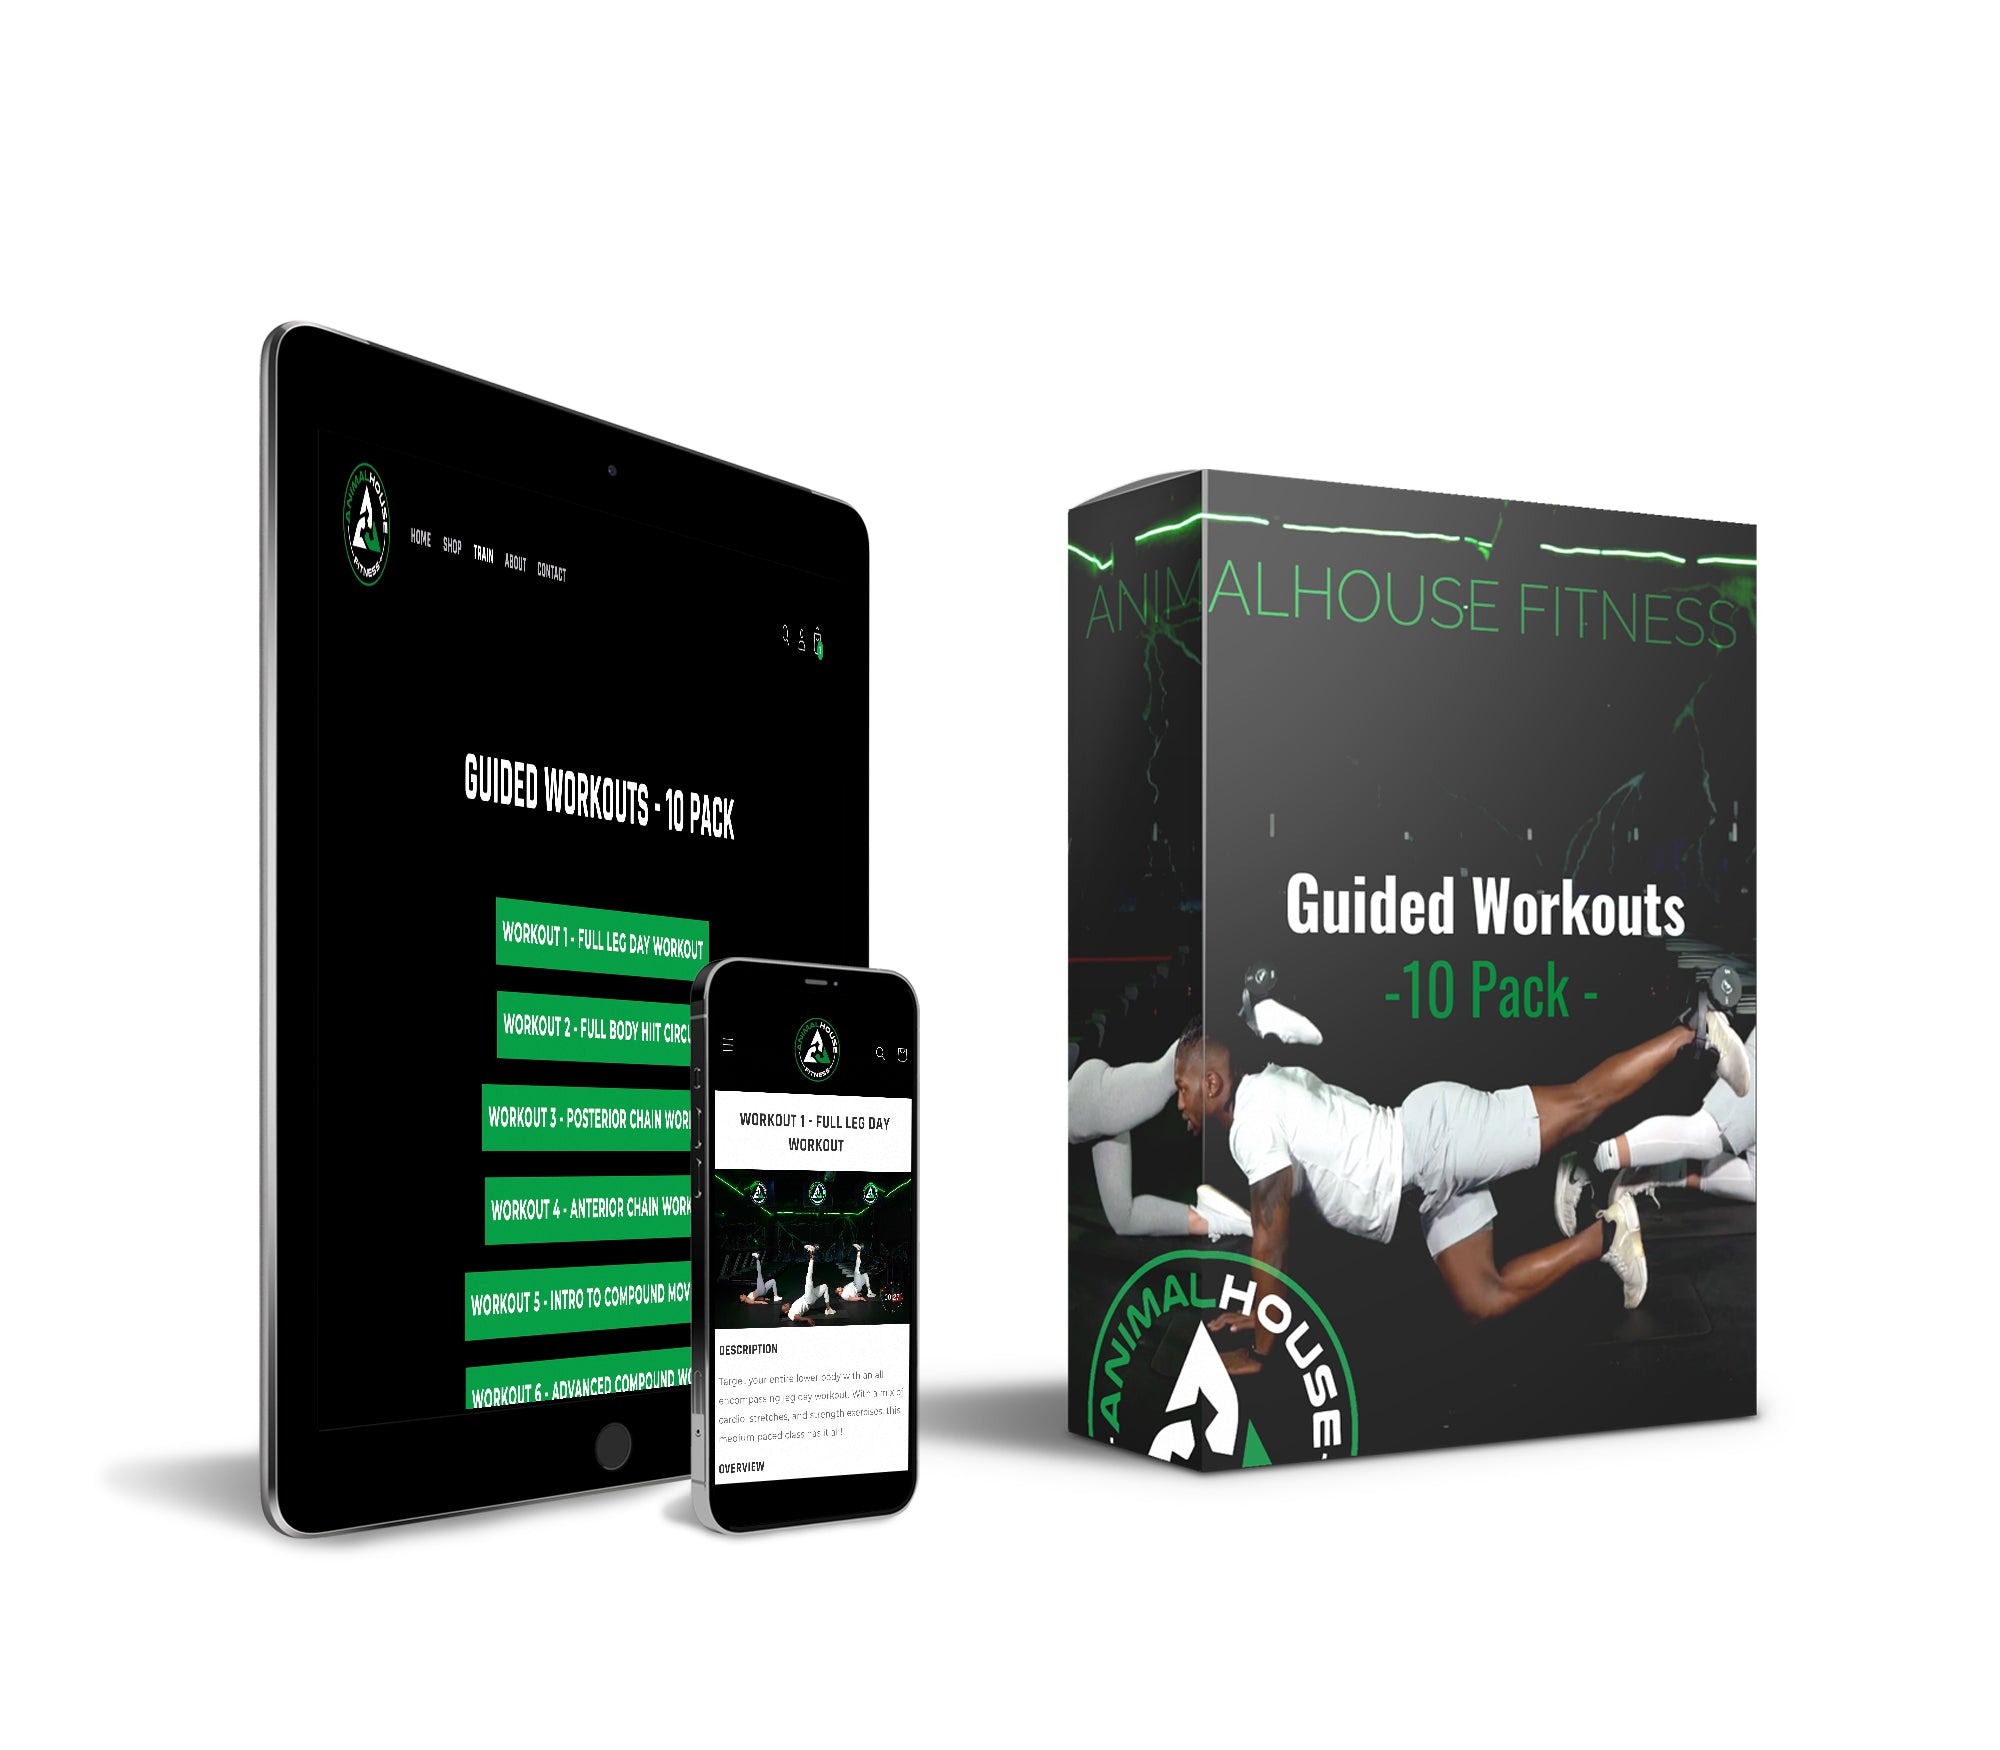 Guided Workouts - 10 Pack